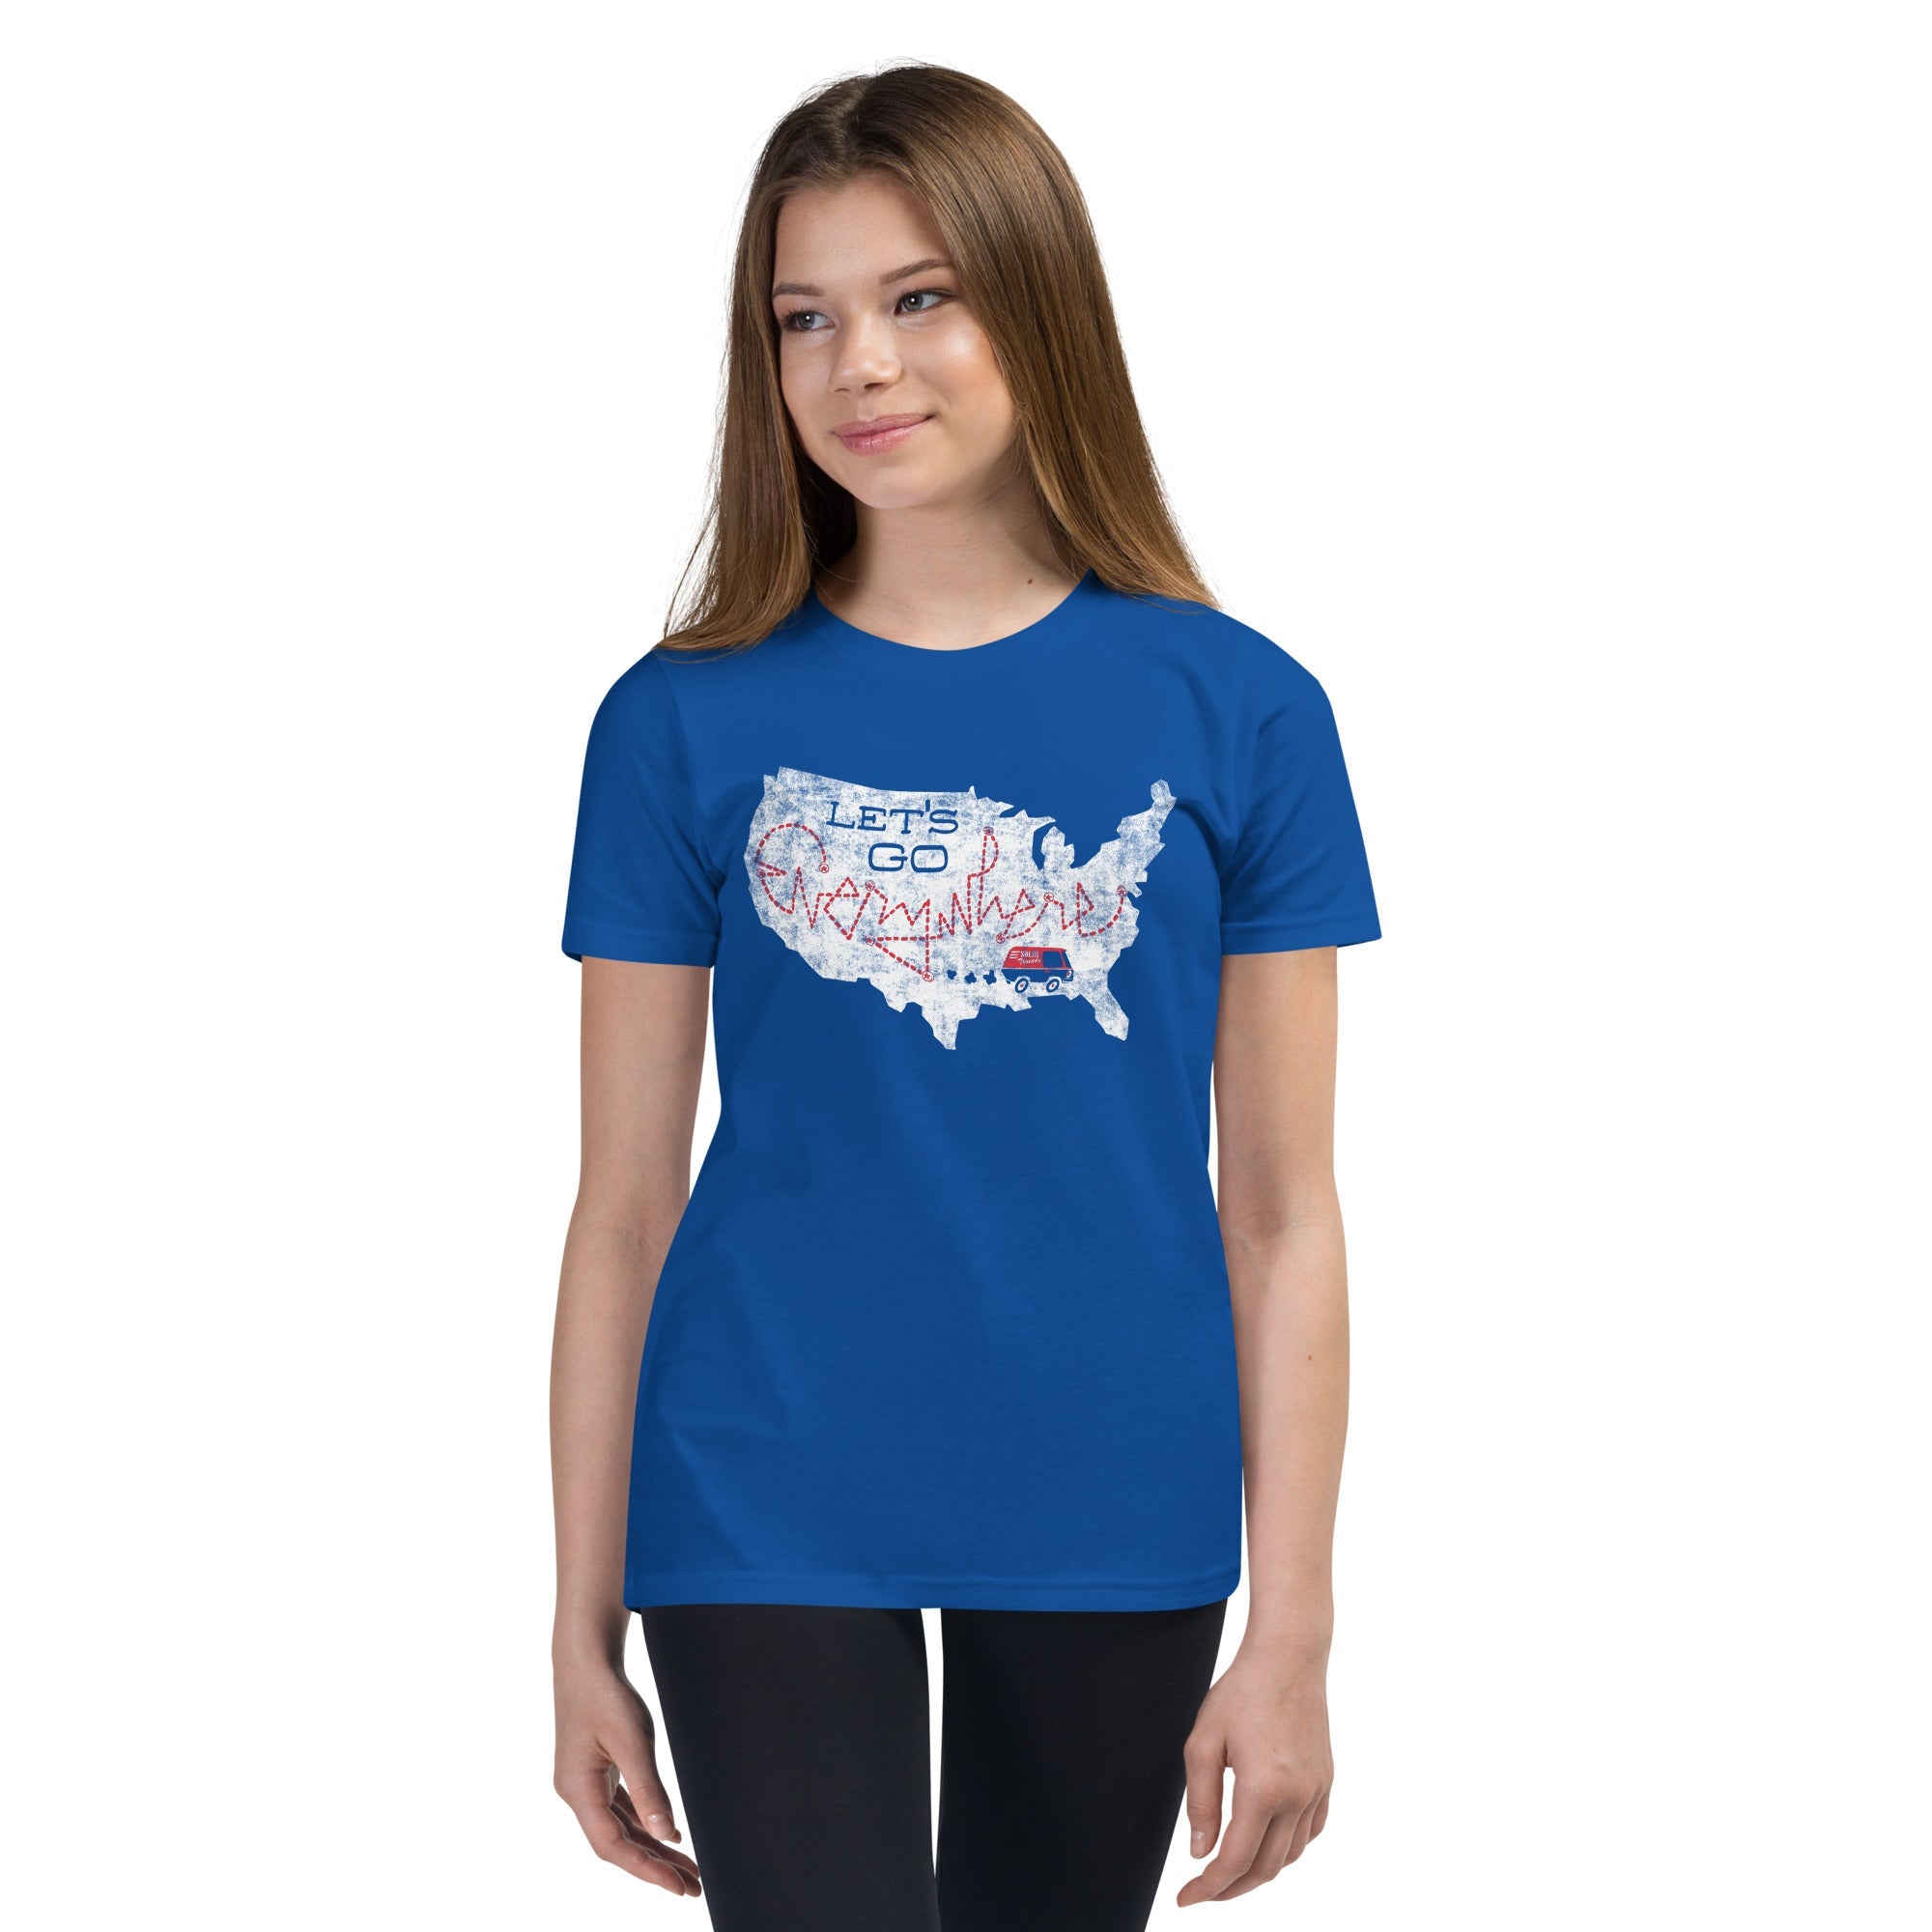 Youth Lets Go Everywhere Cool Extra Soft T-Shirt | Retro Road Trip Kids Tee Girl Model | Solid Threads